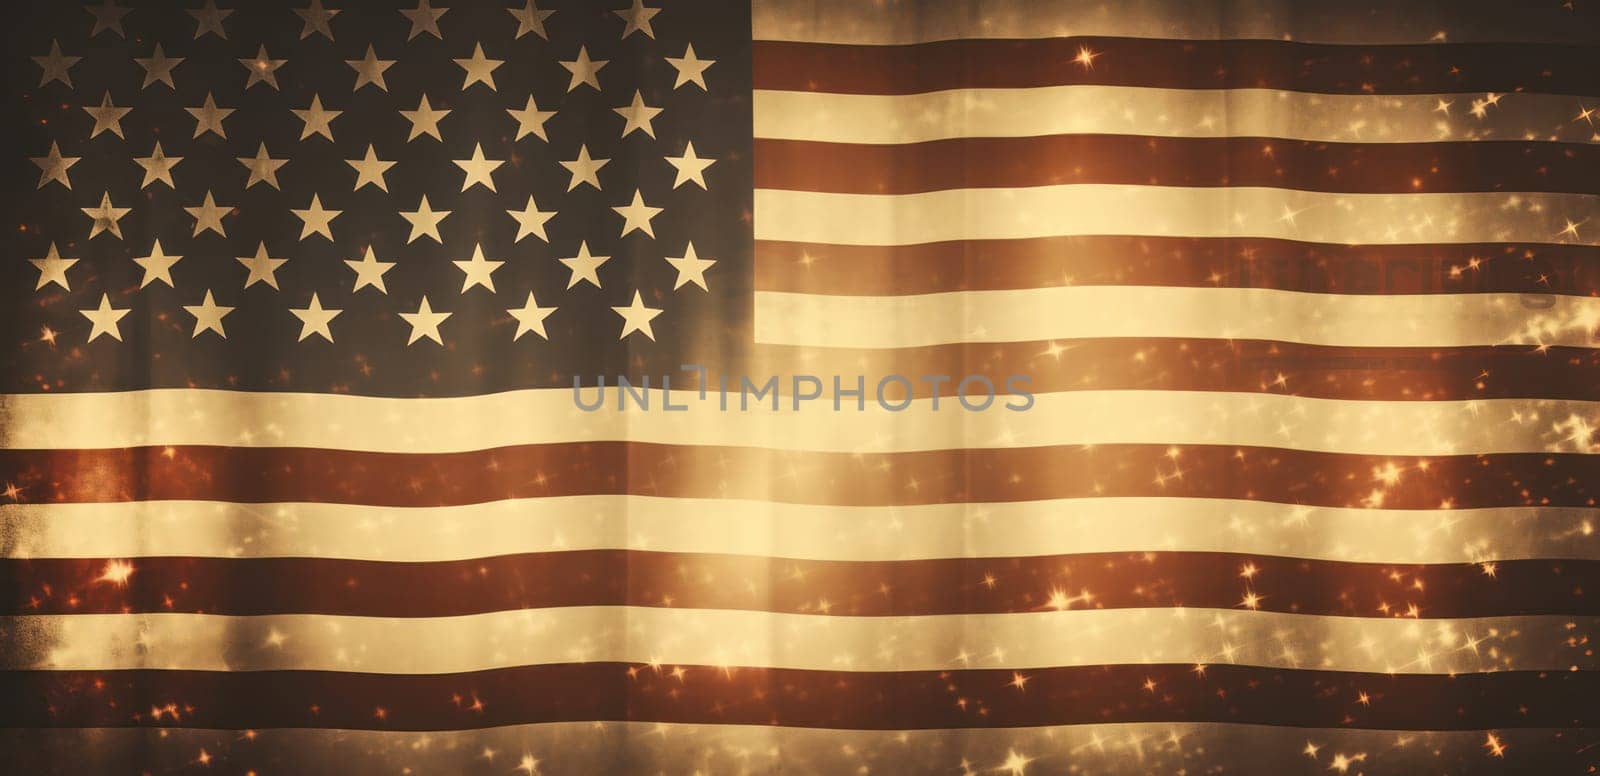 Faded Glory: A Weathered Vintage American Flag, Symbolic of Patriotism and Freedom, Against a Grunge and Textured Background by Vichizh